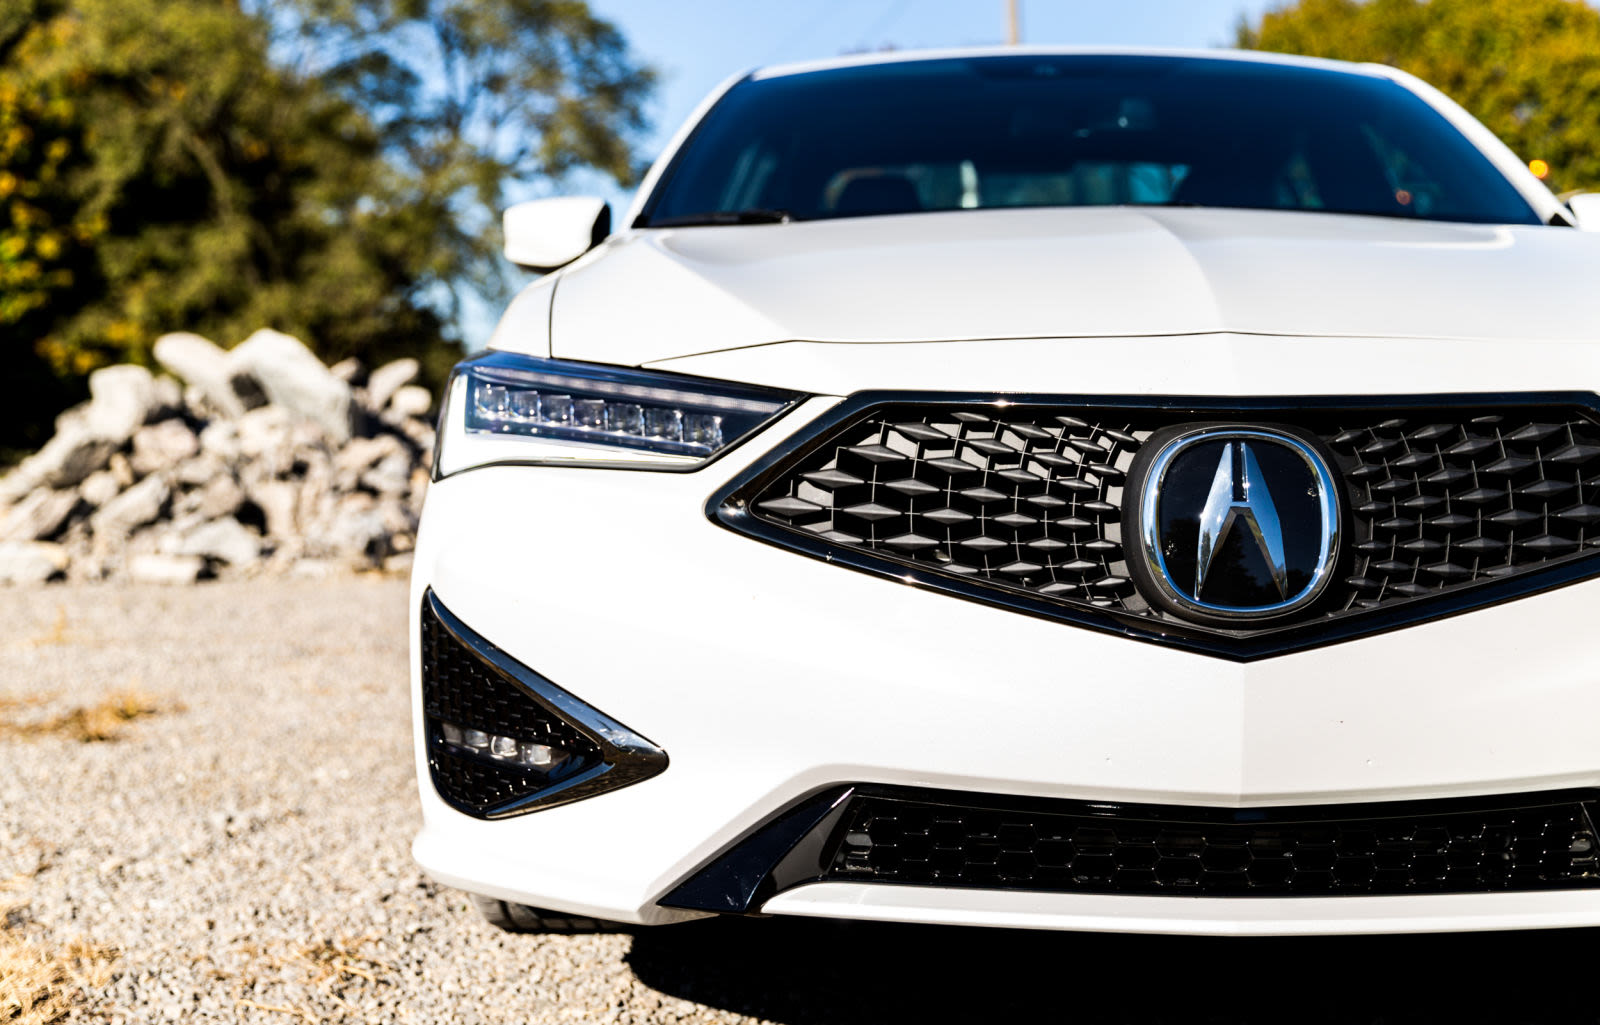 Illustration for article titled The 2019 Acura ILX is a Cyclops